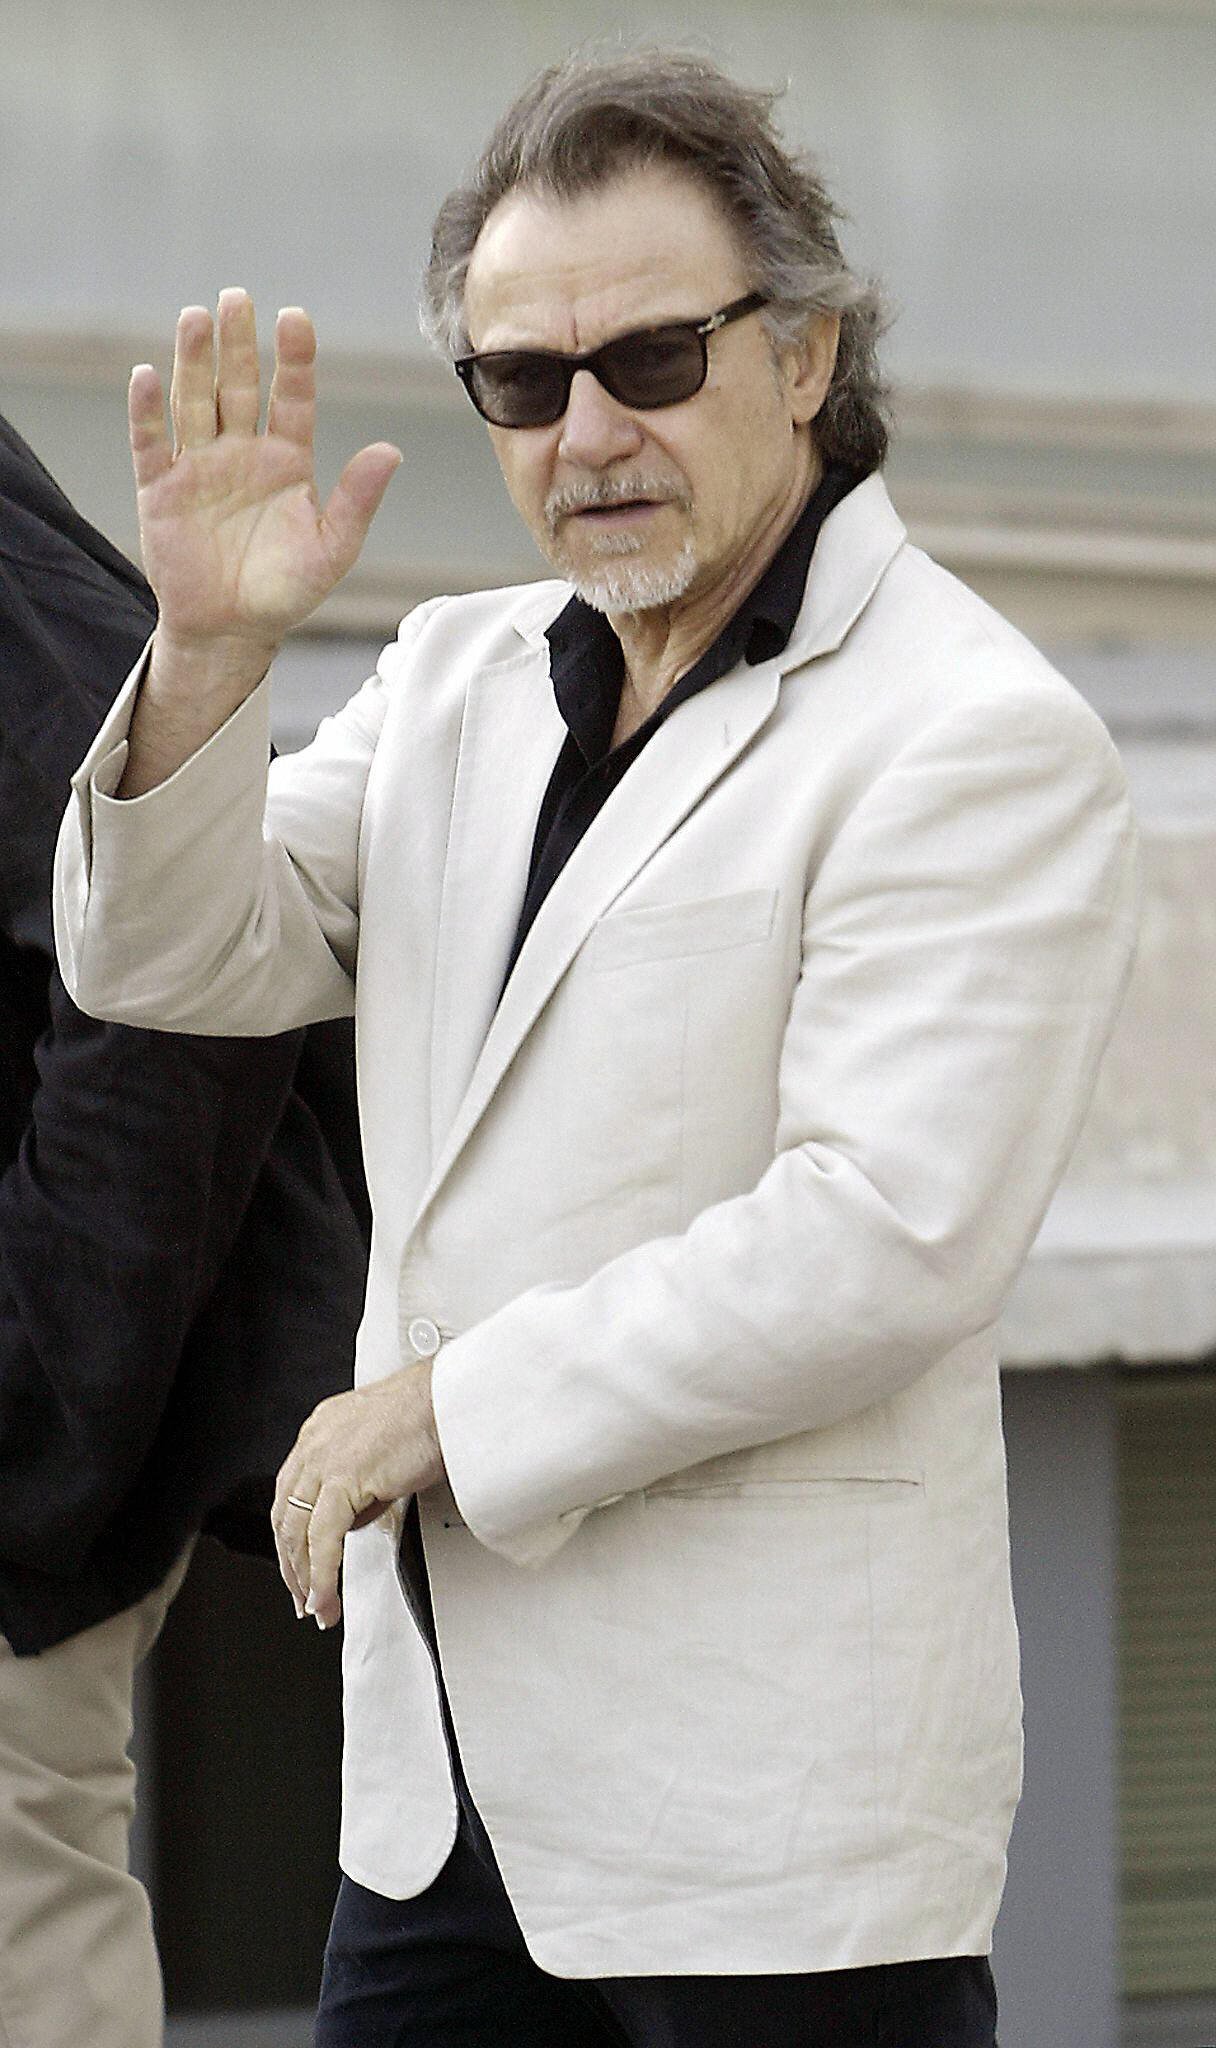 US actor Harvey Keitel poses for photographers, 20 September 2003, in the Spanish northern Basque city of San Sebastian, during the presentation of his film "El Misterio Galindez" | Source: Getty Images